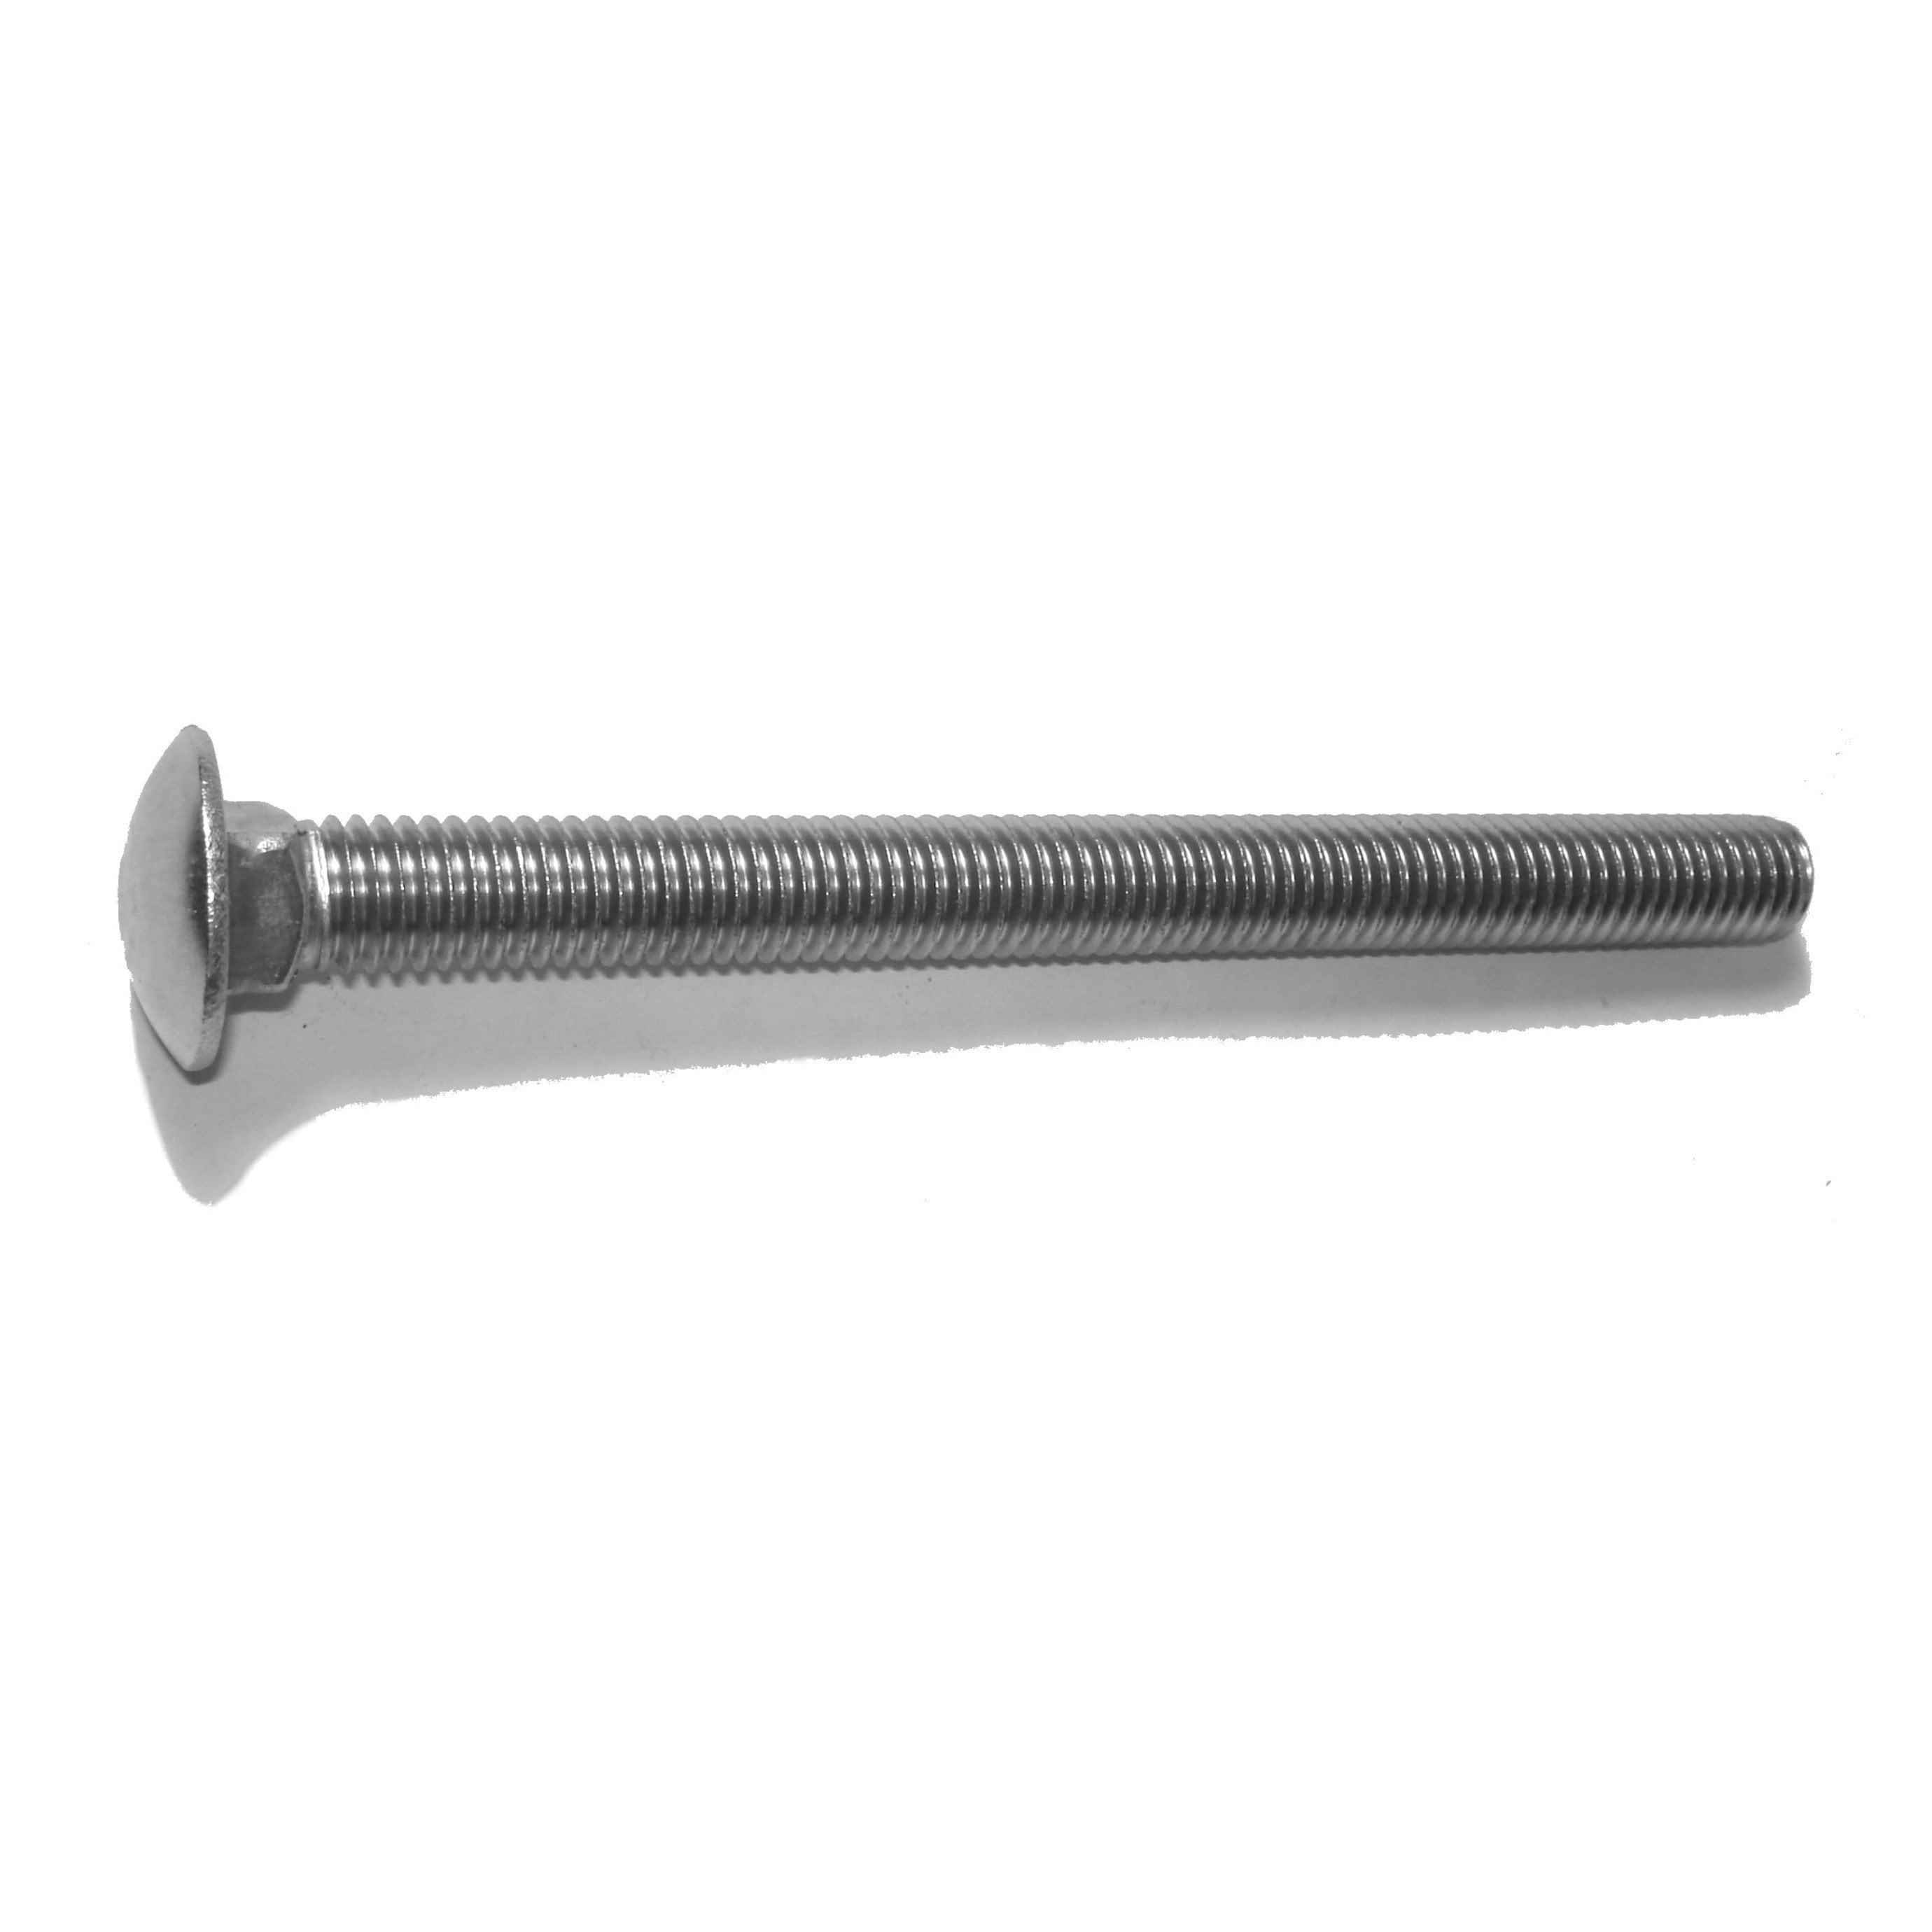 2 Units 18-8 Stainless Steel Carriage Bolt Screw 1/2"-13 x 7 1/2" Length 